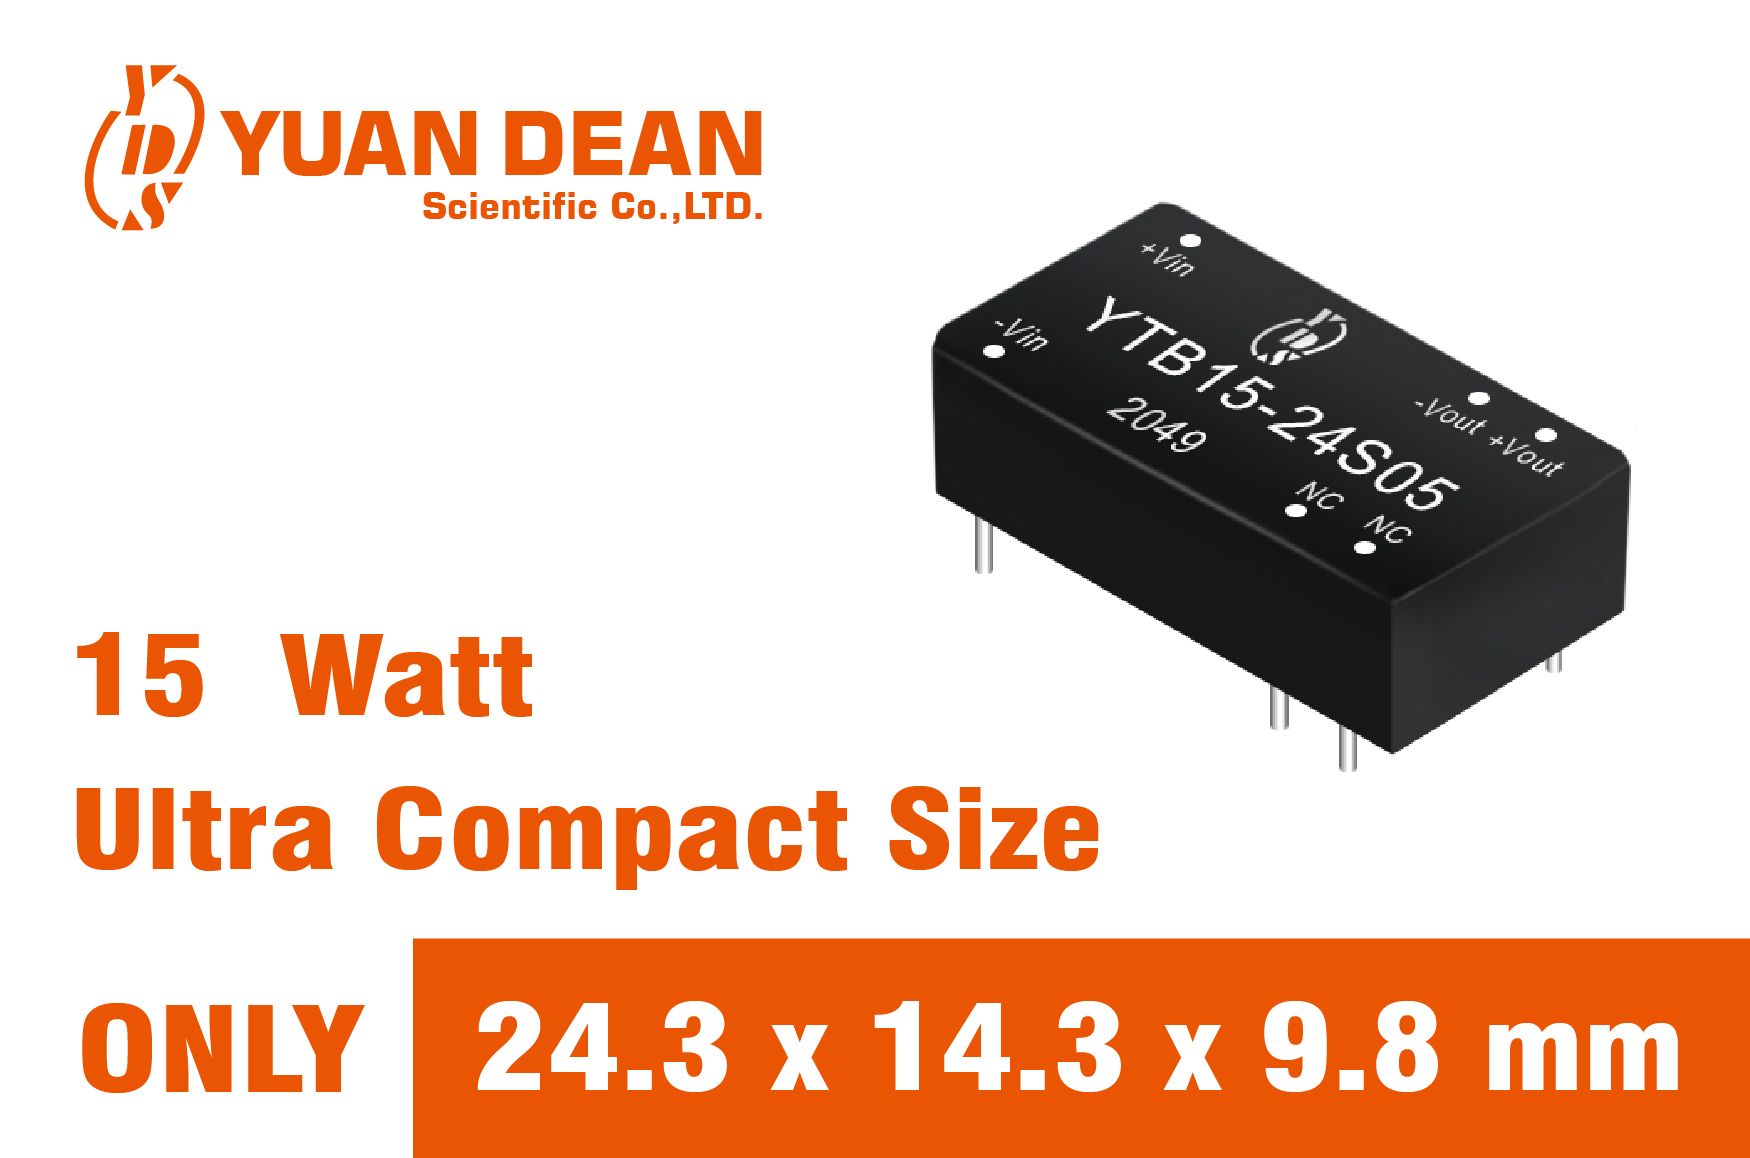 New ultra-compact 15W DC-DC converter release